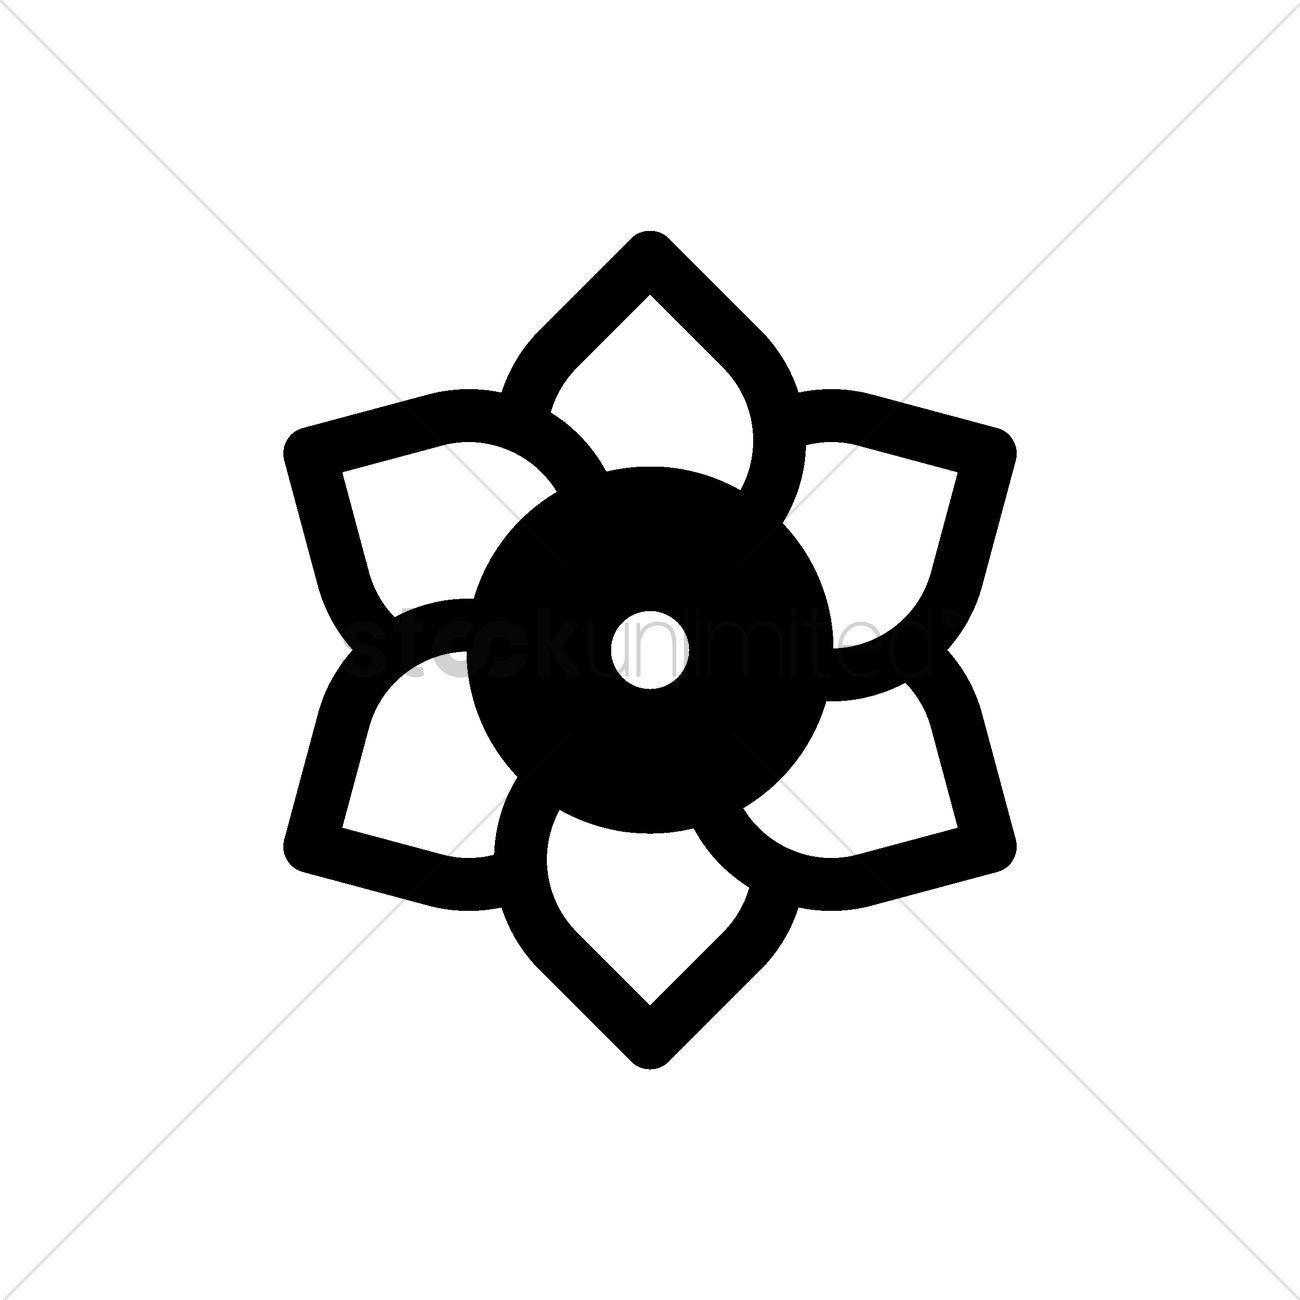 Chinese Flower Logo - Chinese lotus flower icon Vector Image - 1979214 | StockUnlimited